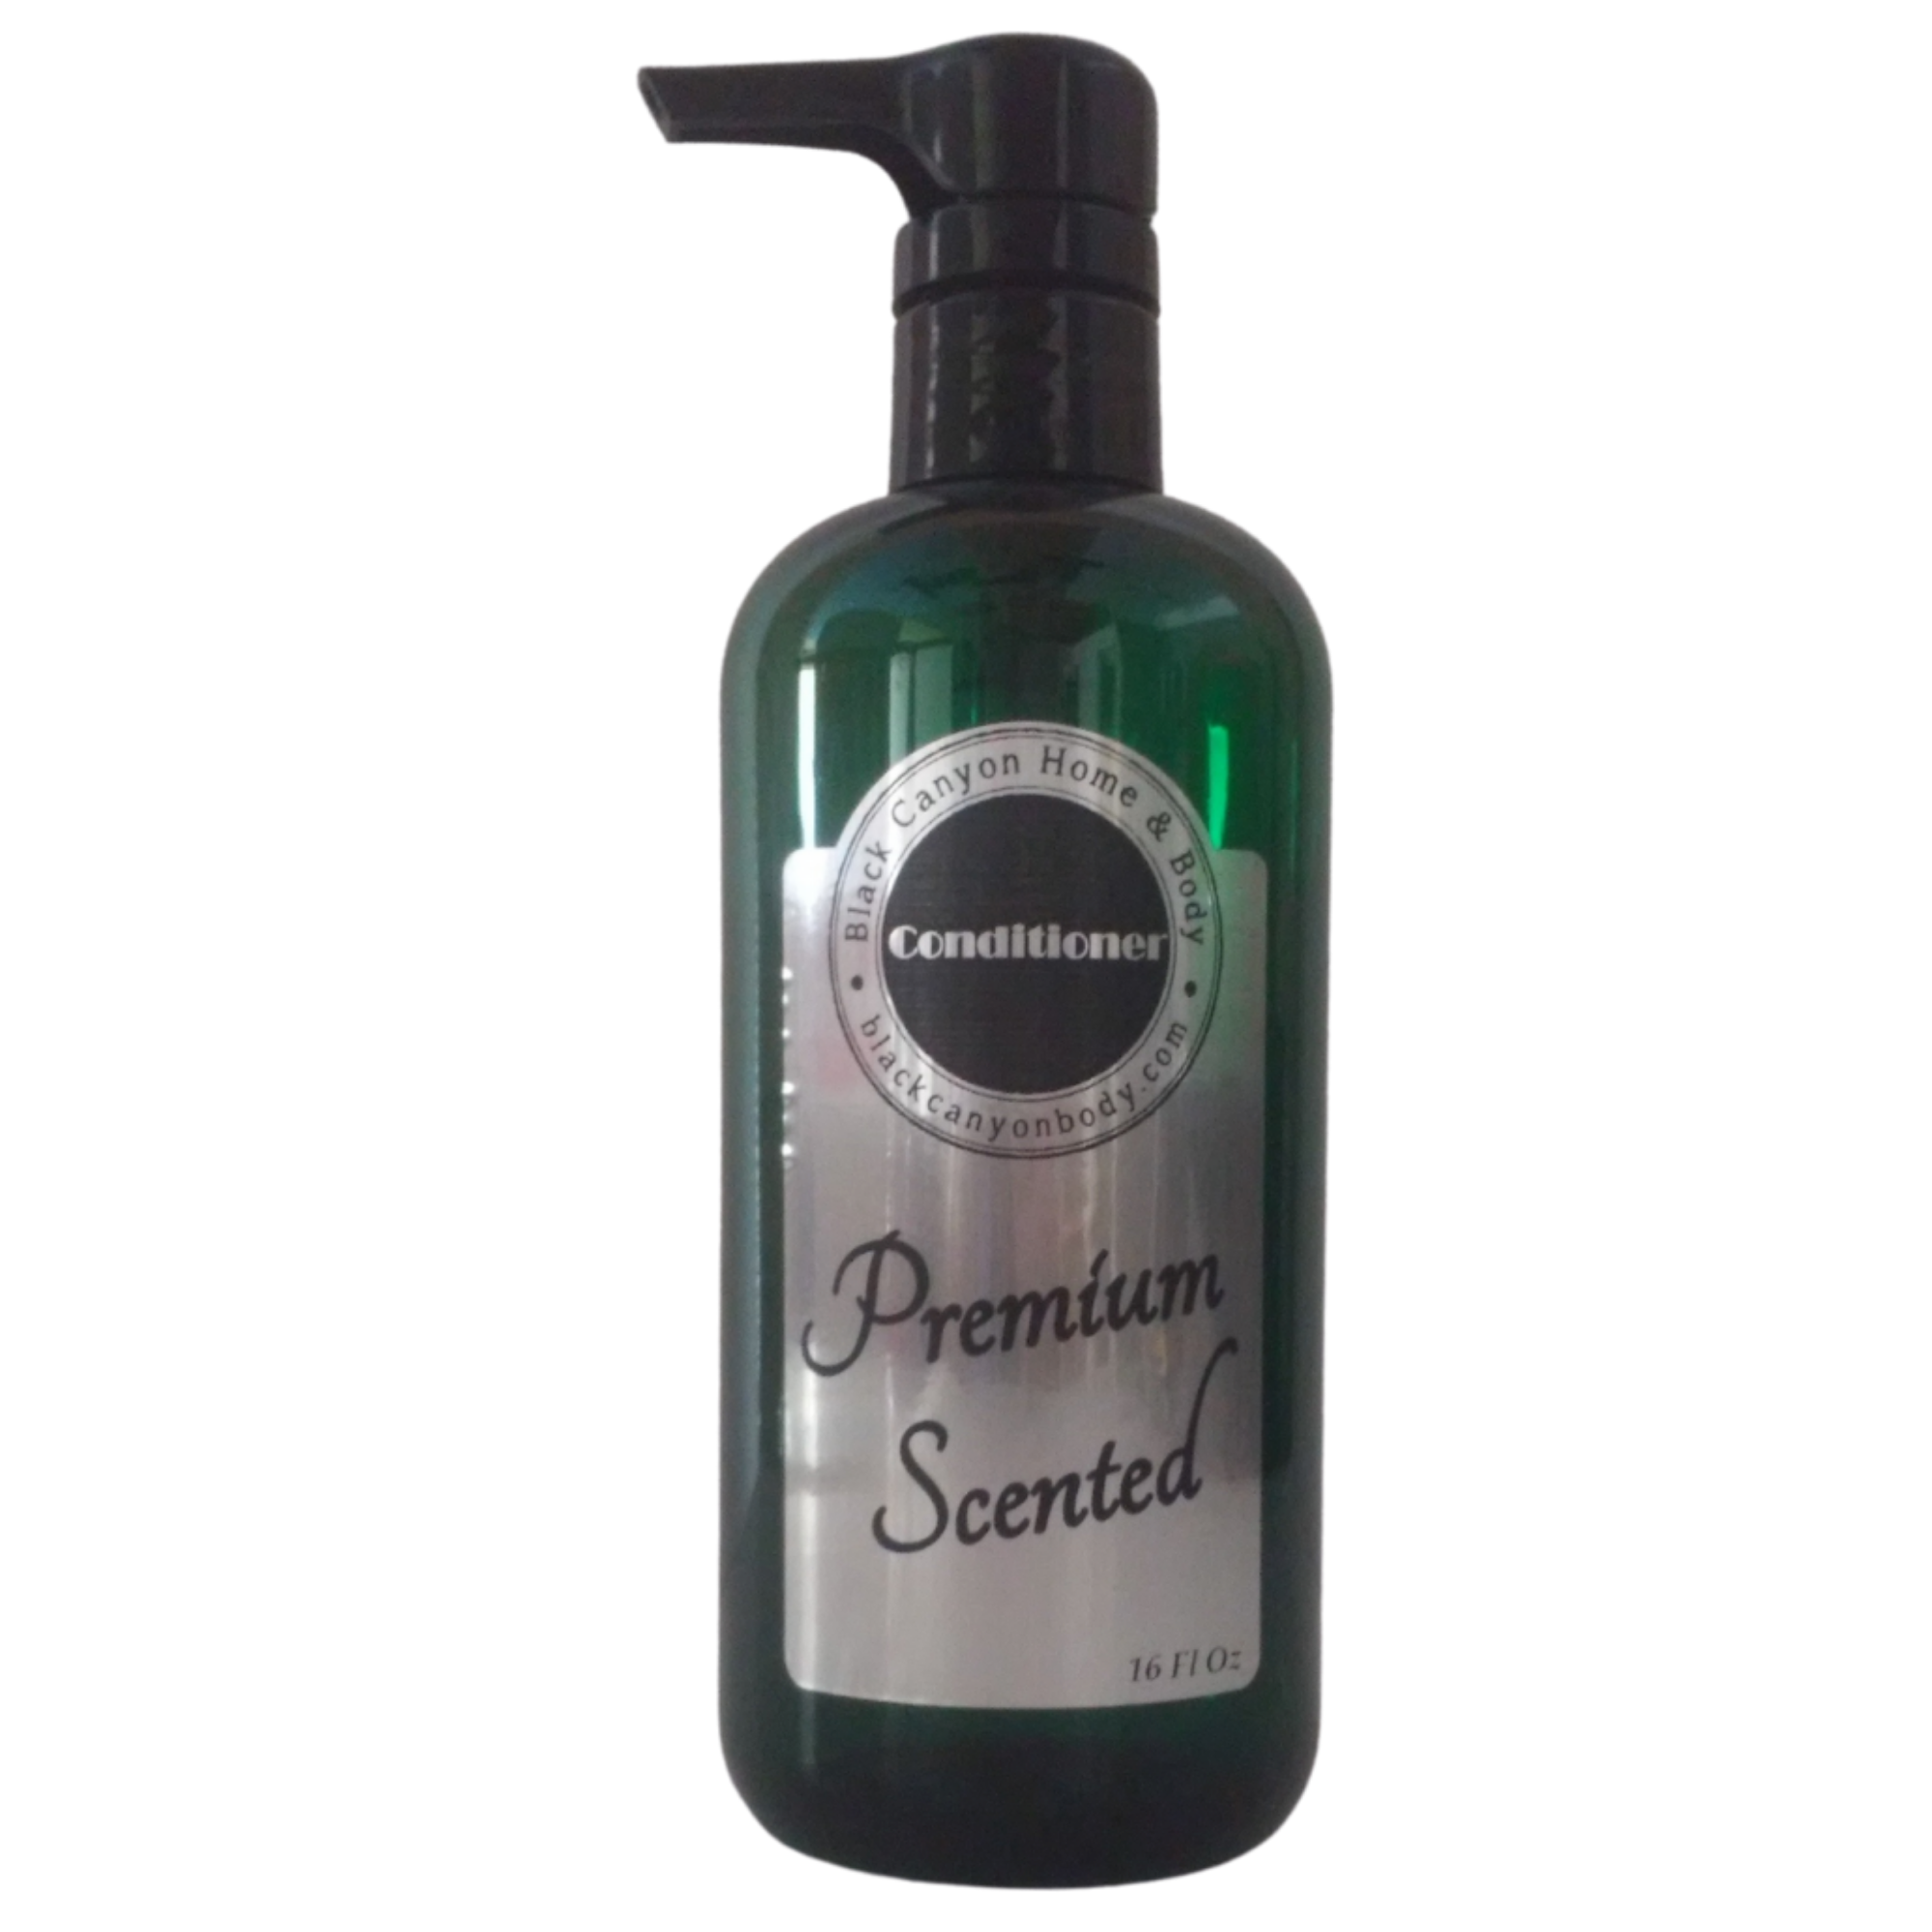 Paydens Cobalt Hellion Scented Conditioner with Argan Oil For Men